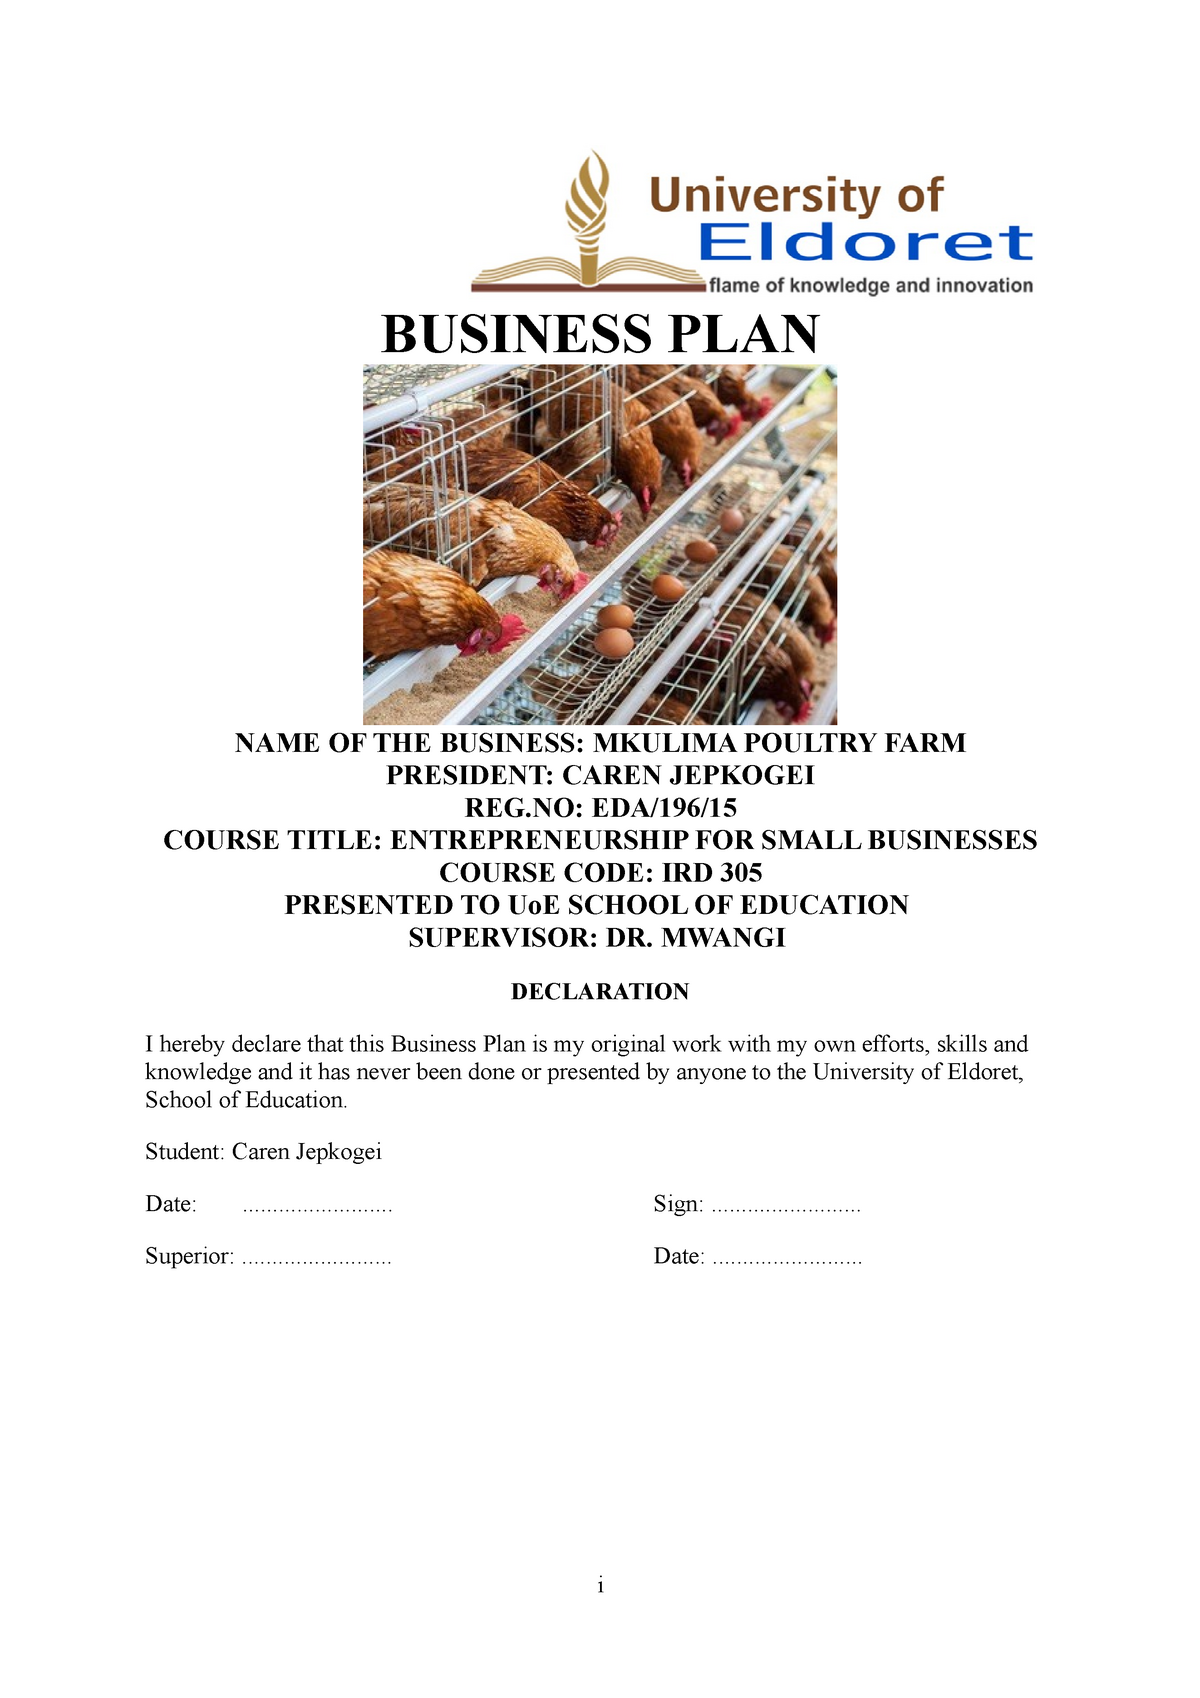 poultry farming business plan in malaysia